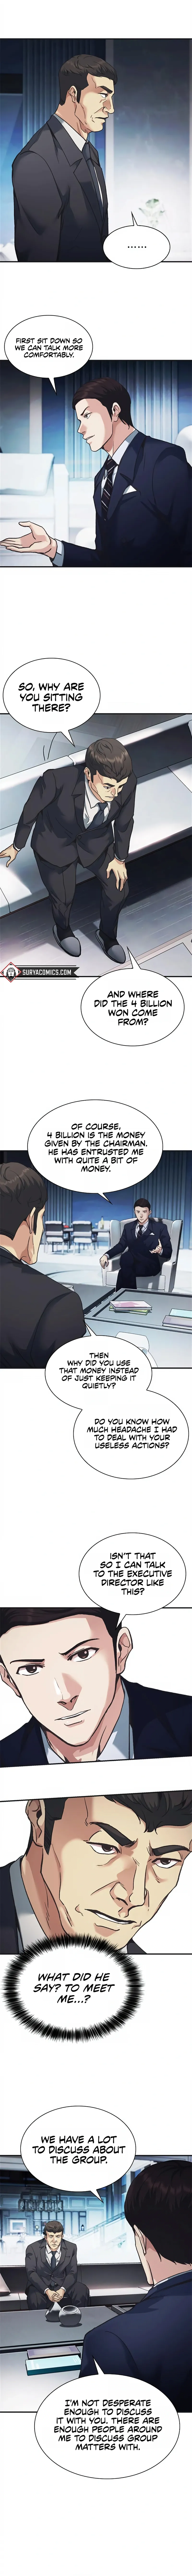 Chairman Kang: The Newcomer Chapter 23 page 20